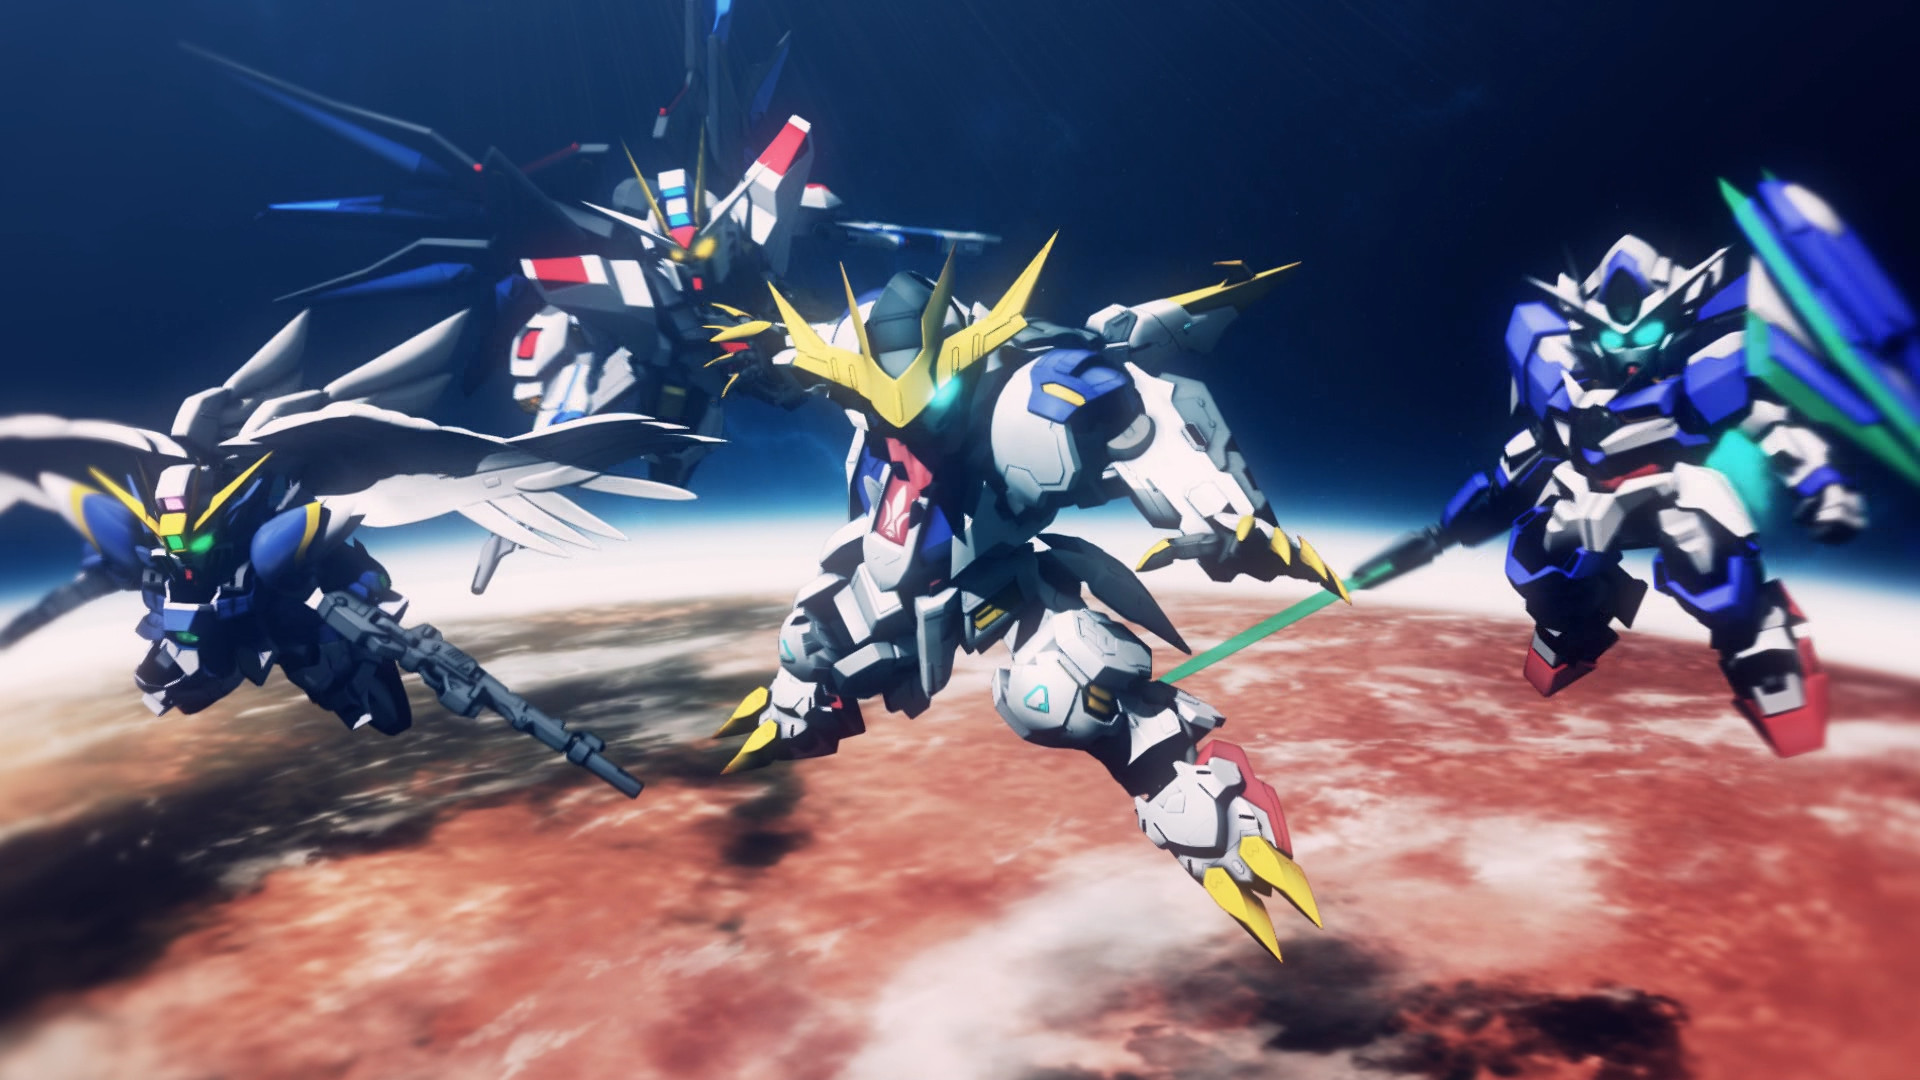 Find the best laptops for SD GUNDAM G GENERATION CROSS RAYS